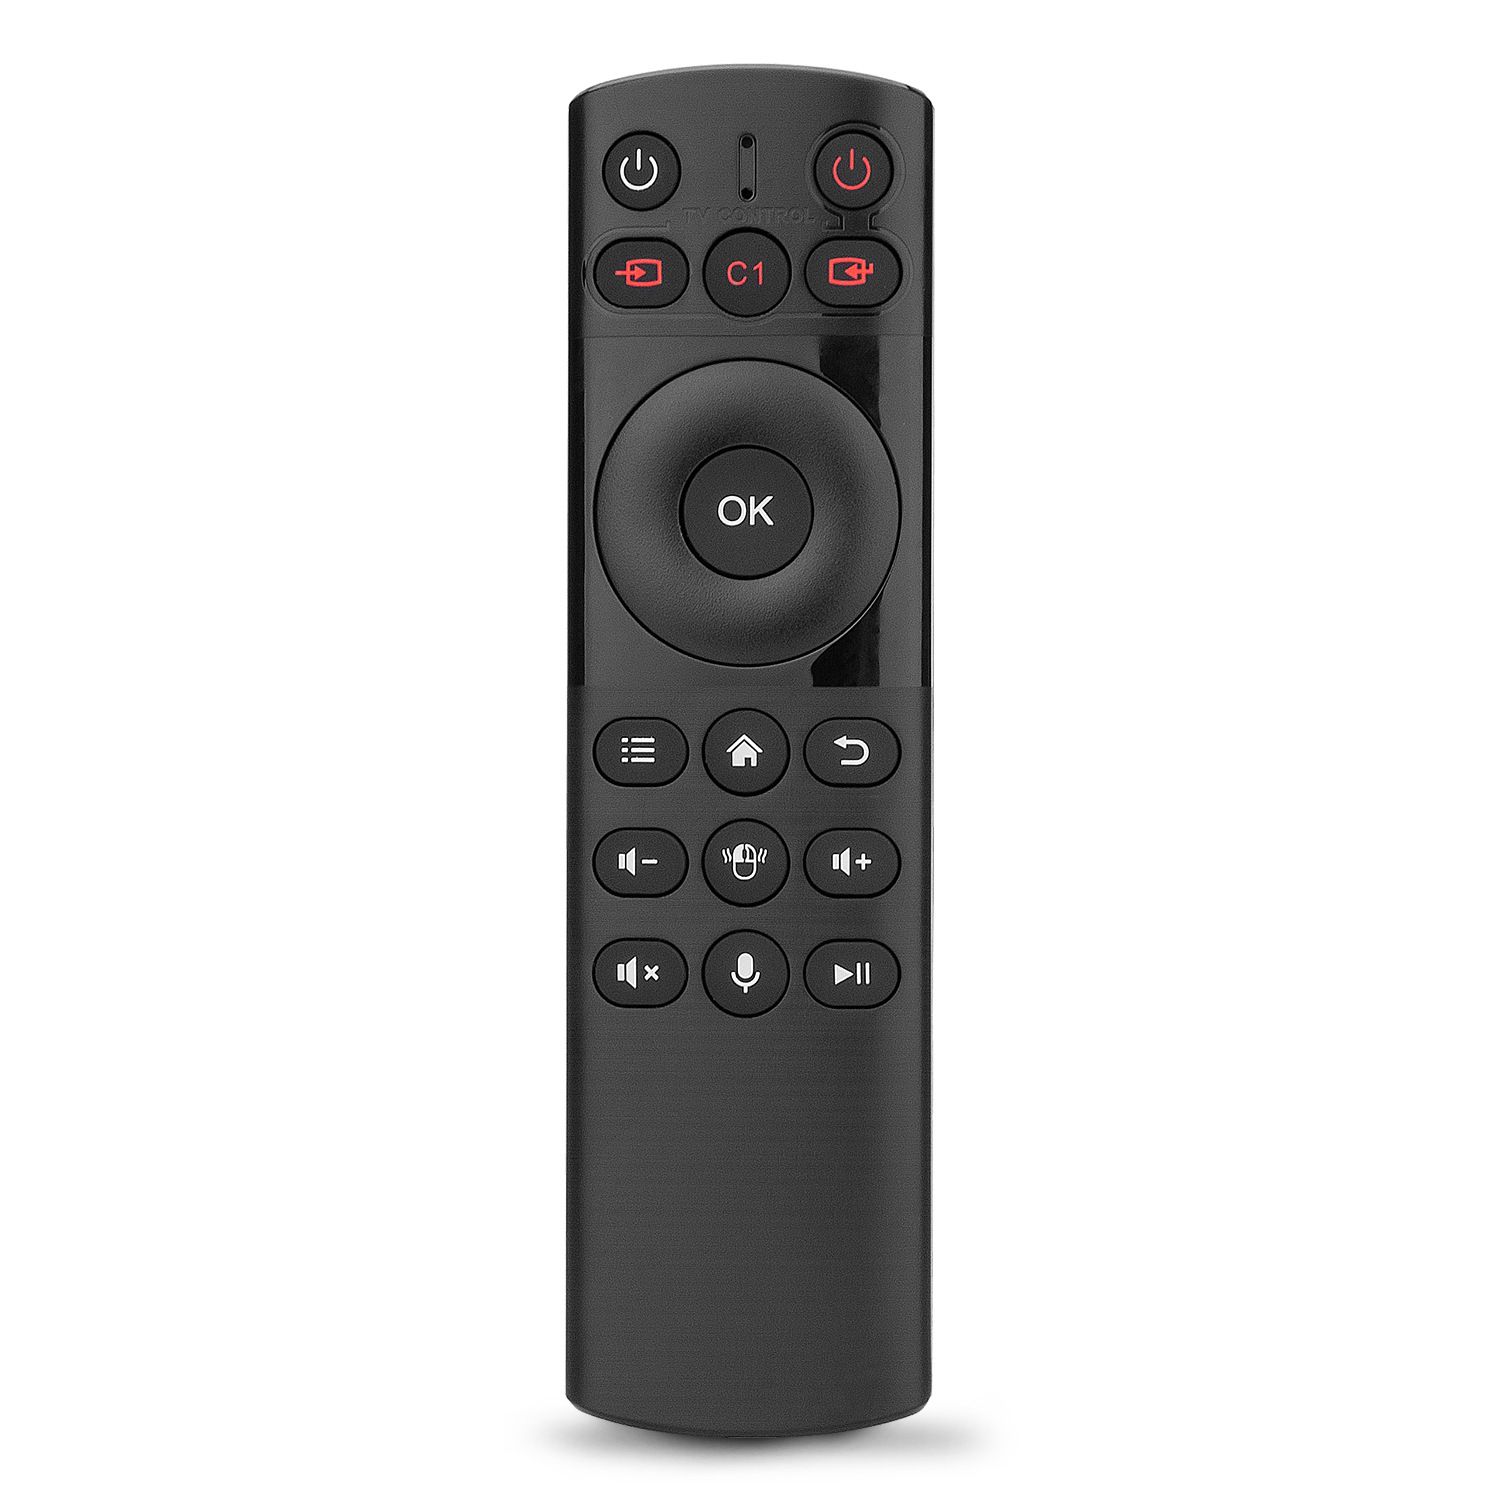 Rii-RT613-24G-Wireless-Voice-Control-Airmouse-IR-Learning-for-TV-Box-Google-Assistant-1612249